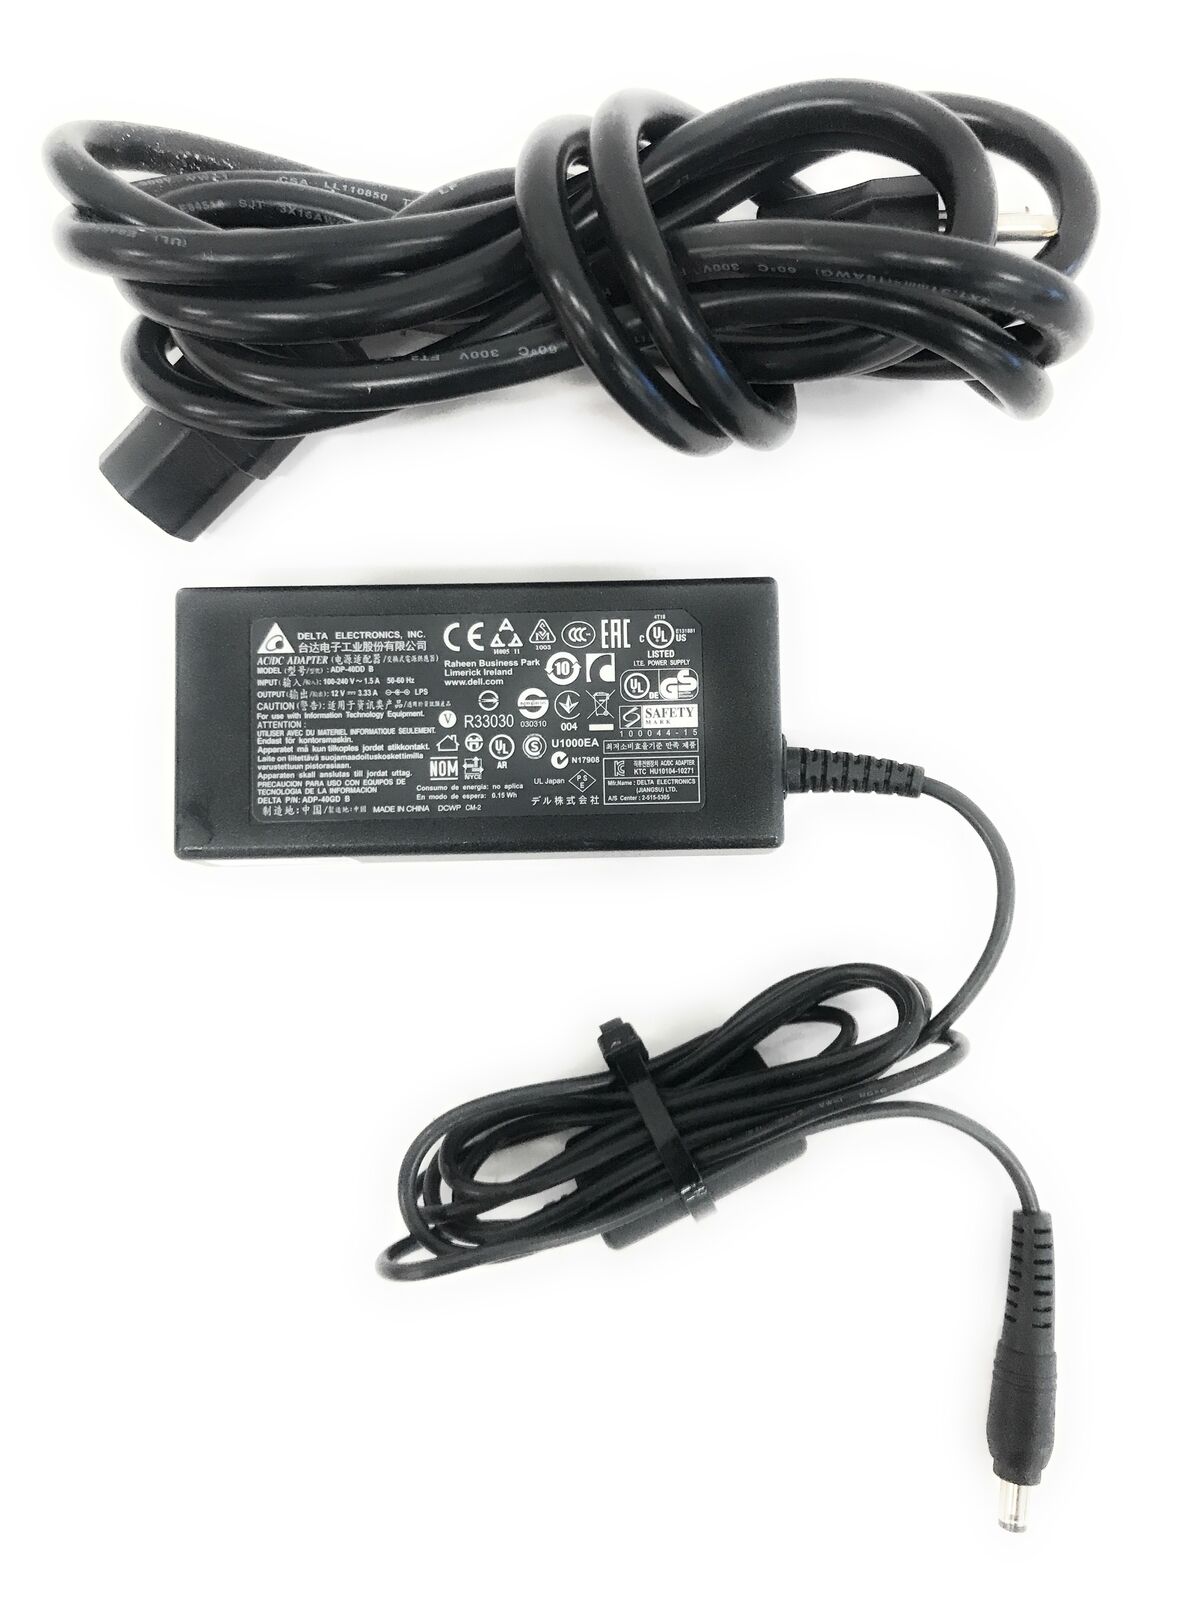 7-Genuine Delta for Dell Monitor AC Adapter Power Supply ADP-40DD B ADP-40GD BD